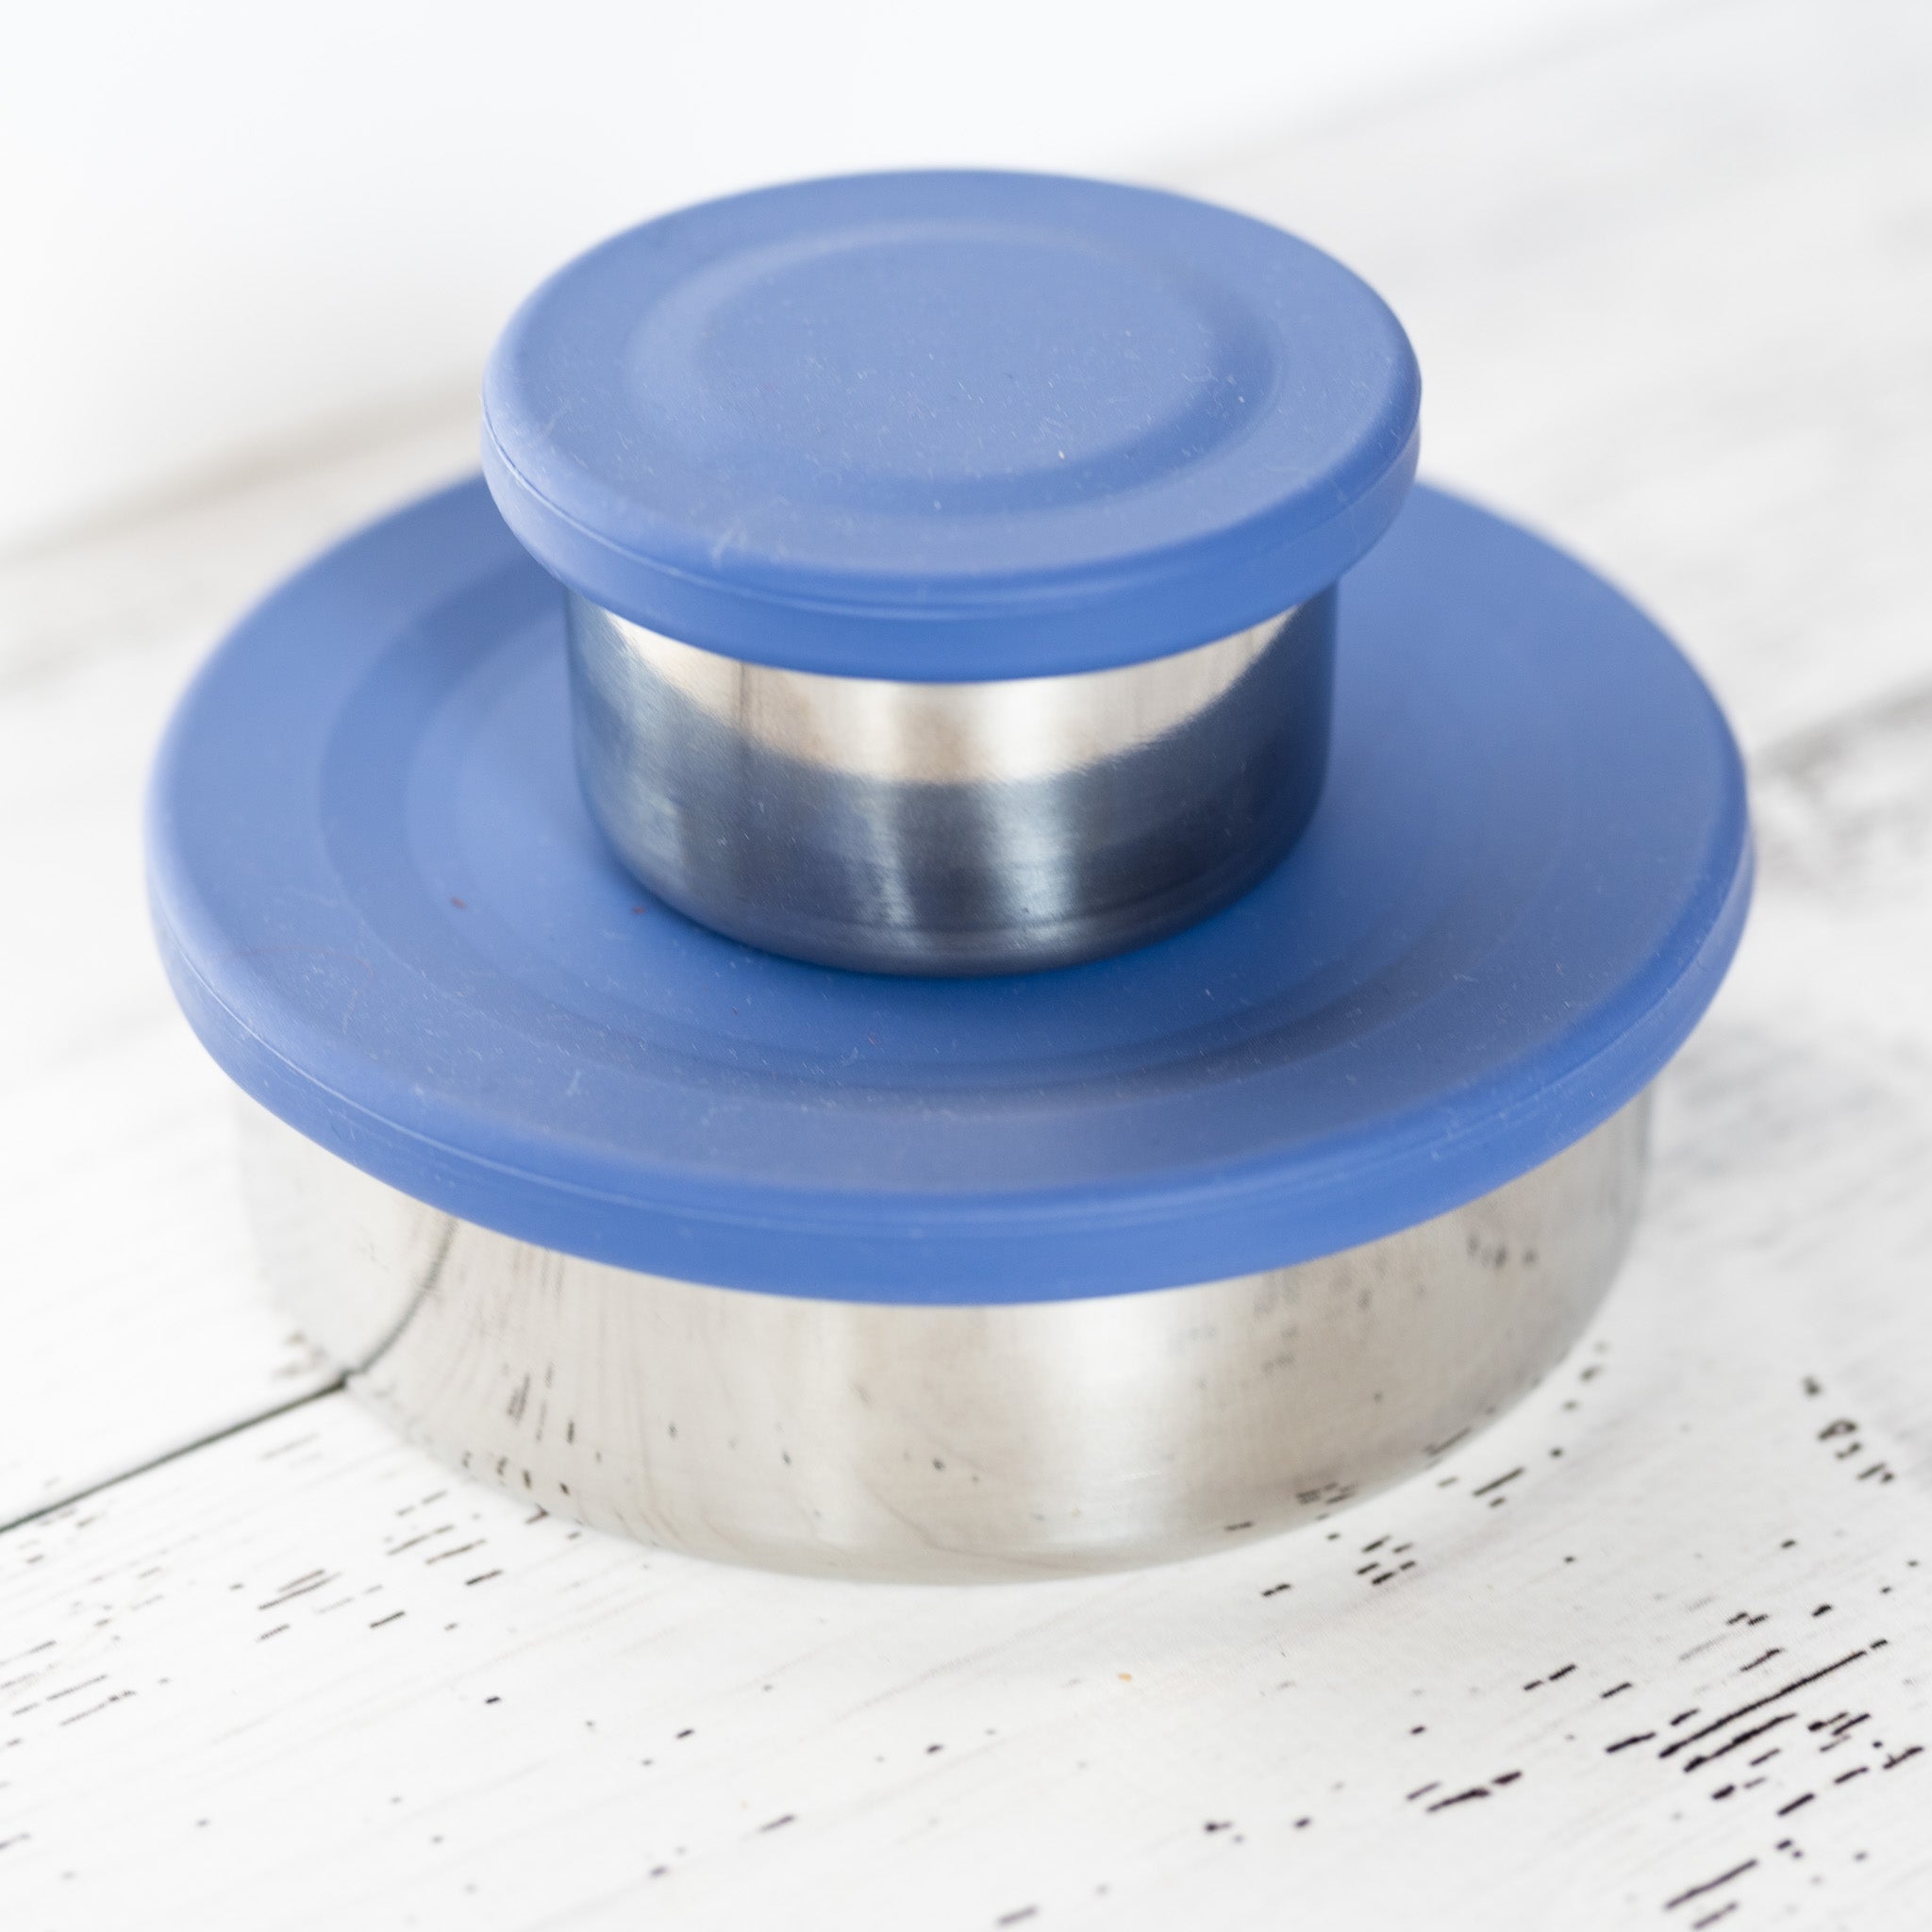 stainless steel snack containers with indigo silicone lids - nudie rudie lunchbox